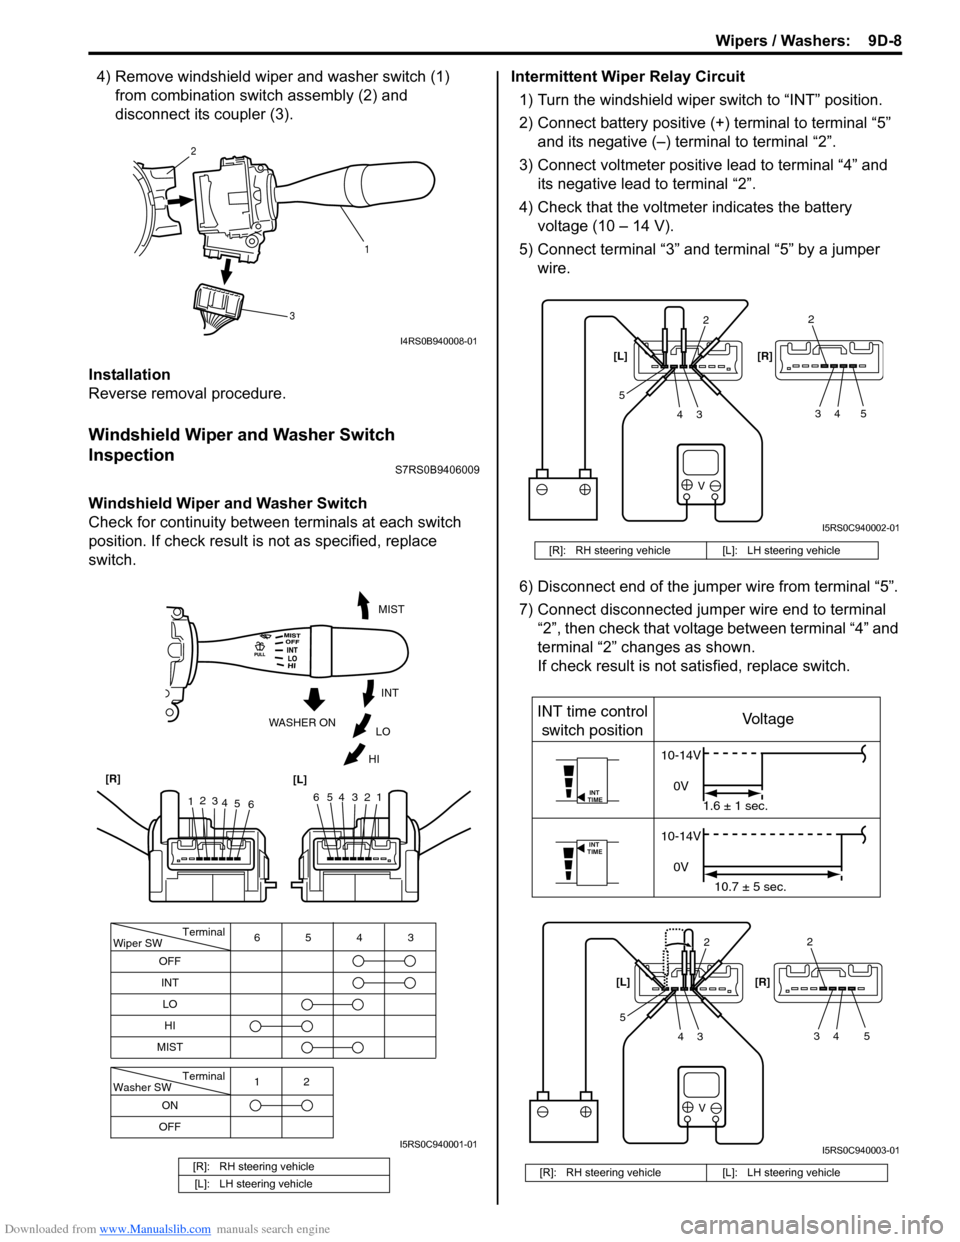 SUZUKI SWIFT 2005 2.G Service User Guide Downloaded from www.Manualslib.com manuals search engine Wipers / Washers:  9D-8
4) Remove windshield wiper and washer switch (1) from combination swit ch assembly (2) and 
disconnect its coupler (3).